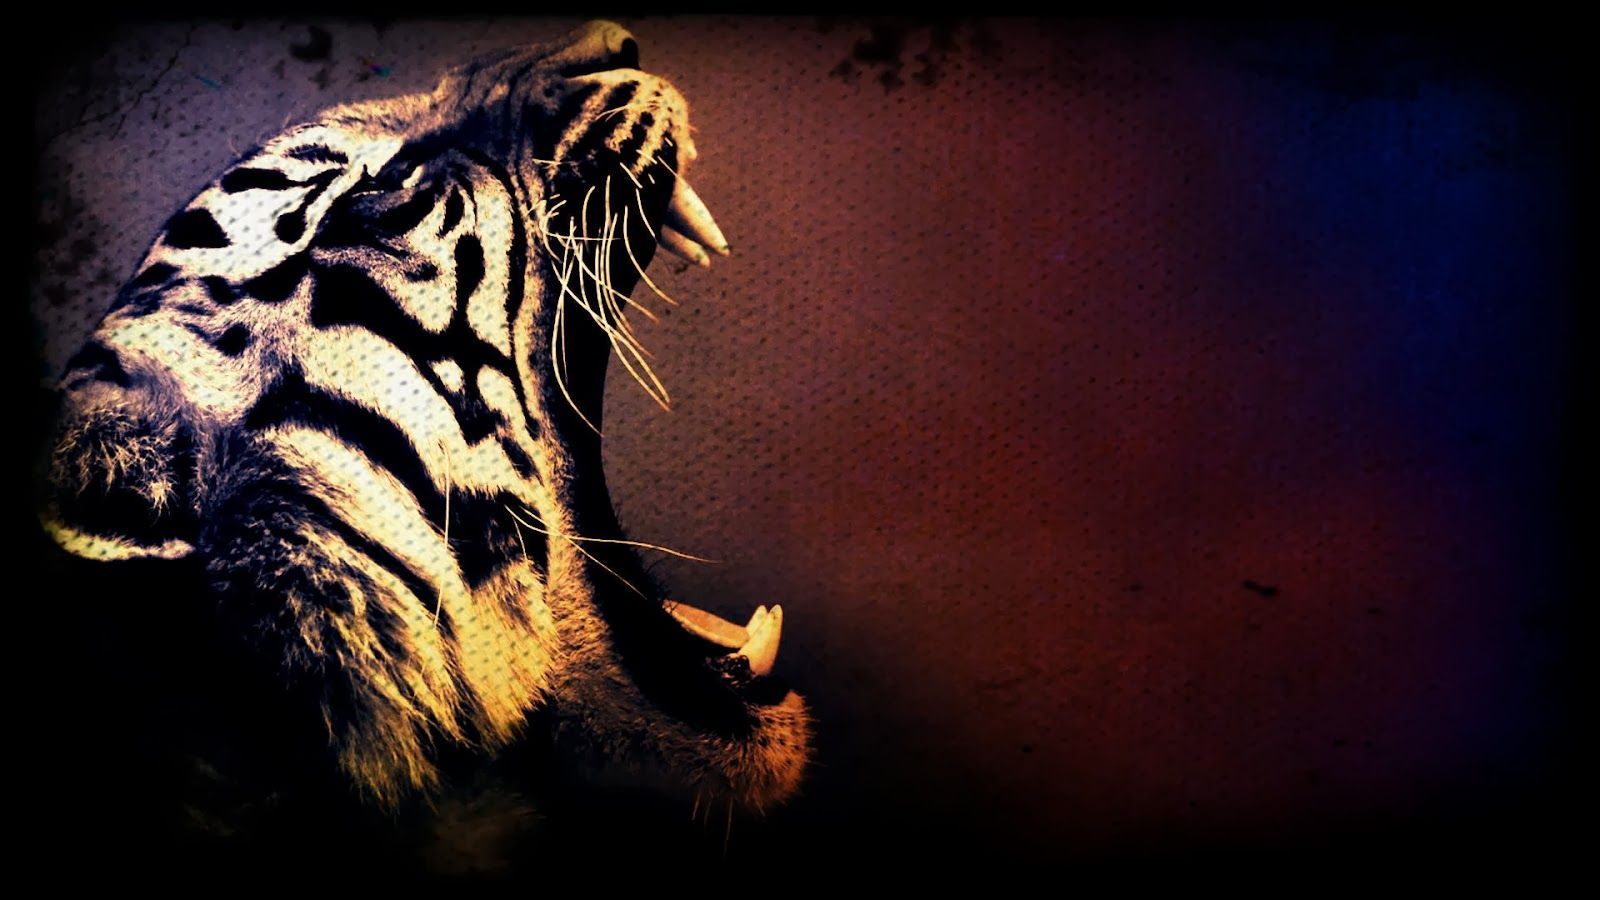 Amazing Tiger wallpaper. Tiger Picture. Tiger art, Tiger picture, Tiger wallpaper